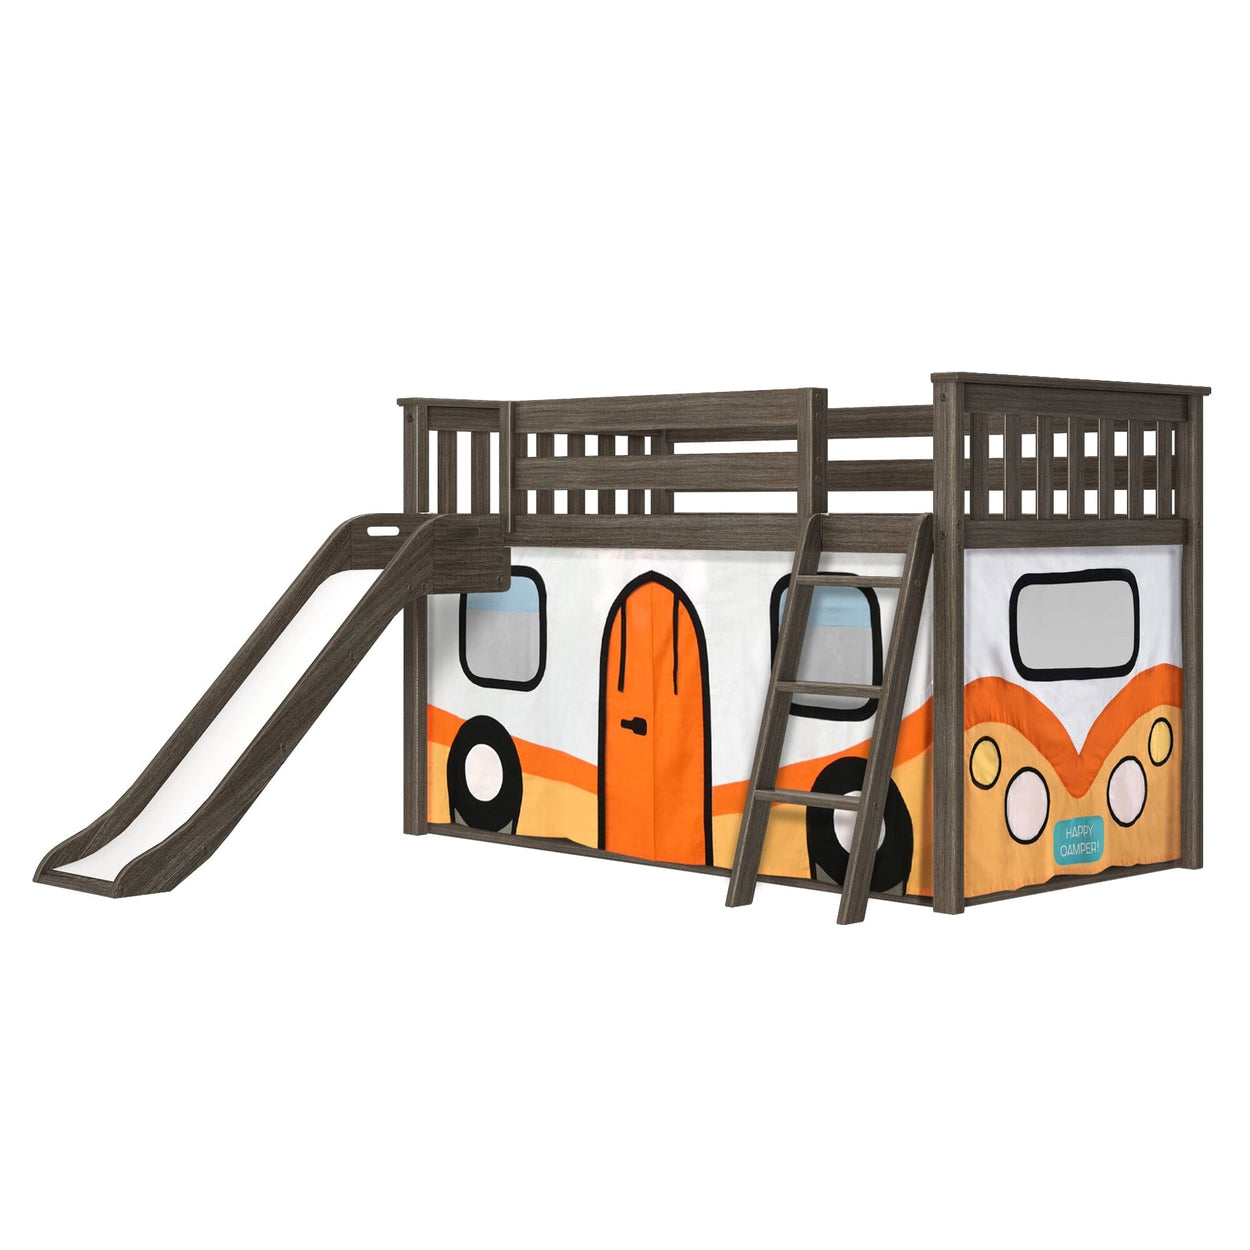 180417151067 : Bunk Beds Low Bunk with Easy Slide and Orange Camper Van Curtain, Clay